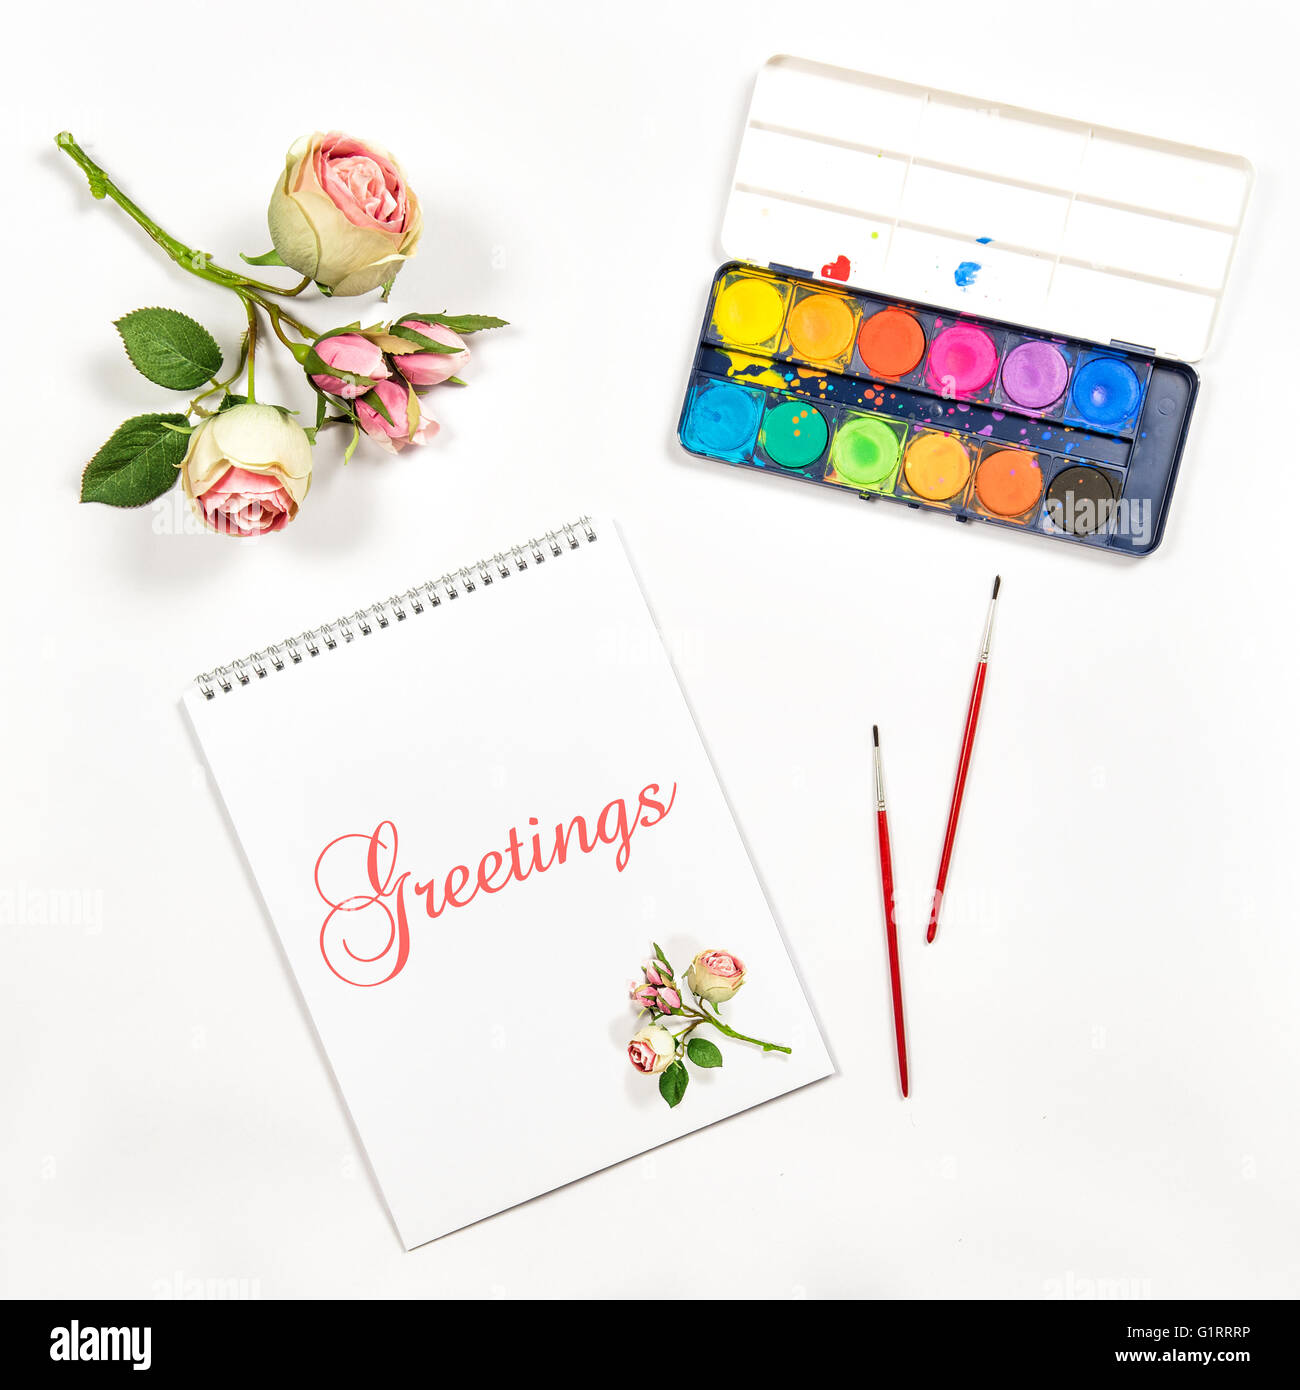 Flat lay with sketchbook, watercolor, brushes, paper, rose flowers. Greetings card concept Stock Photo